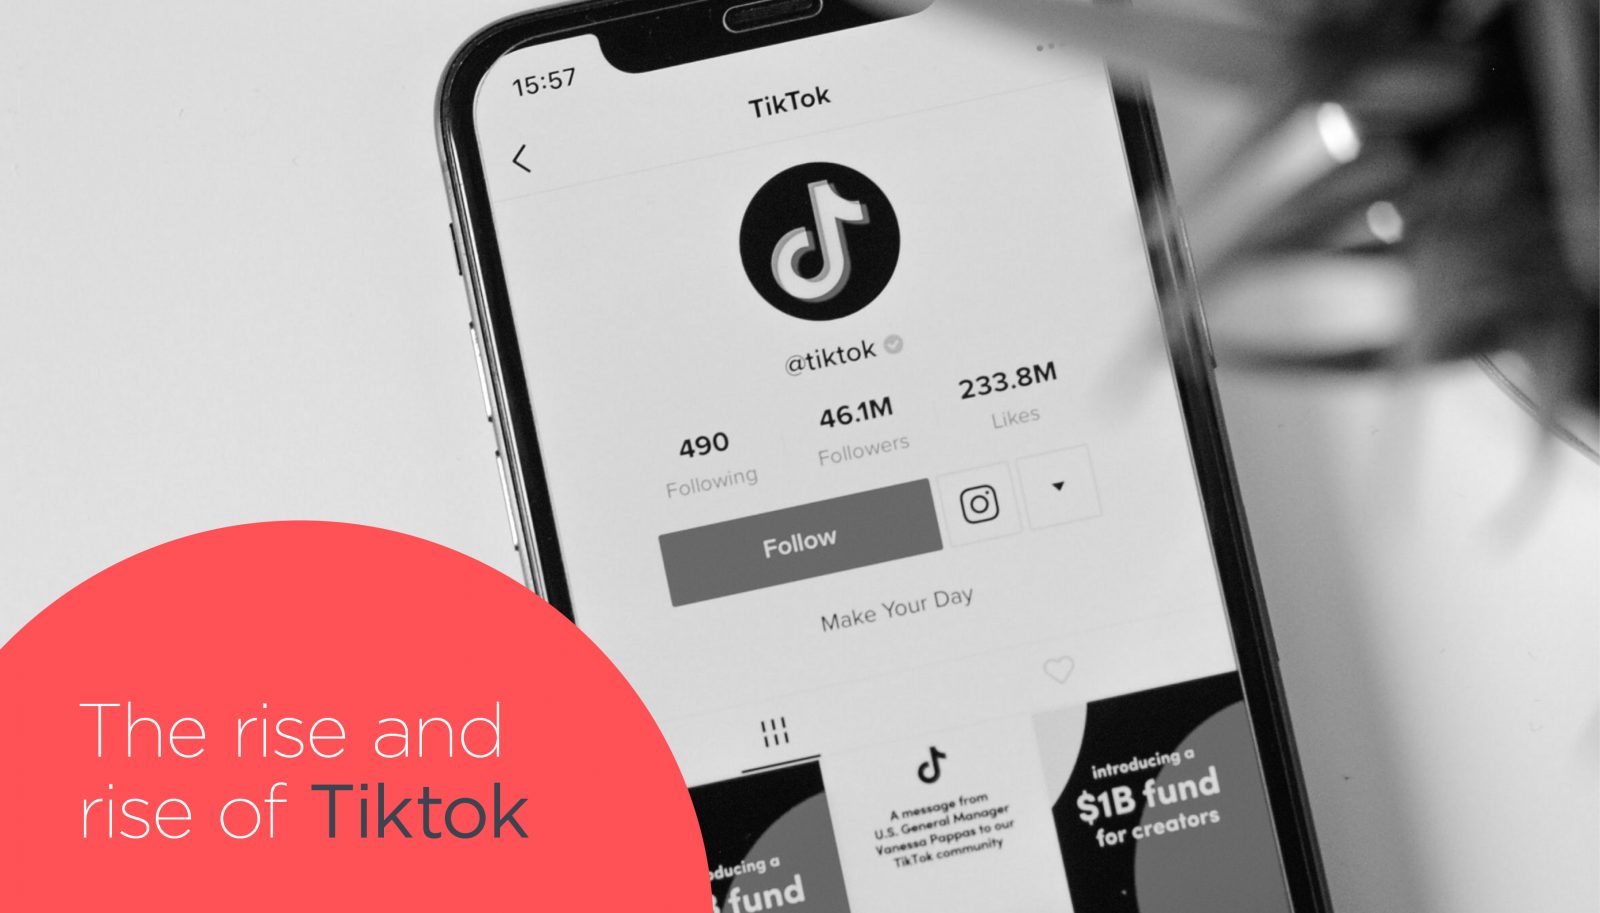 The Rise and Rise of TikTok